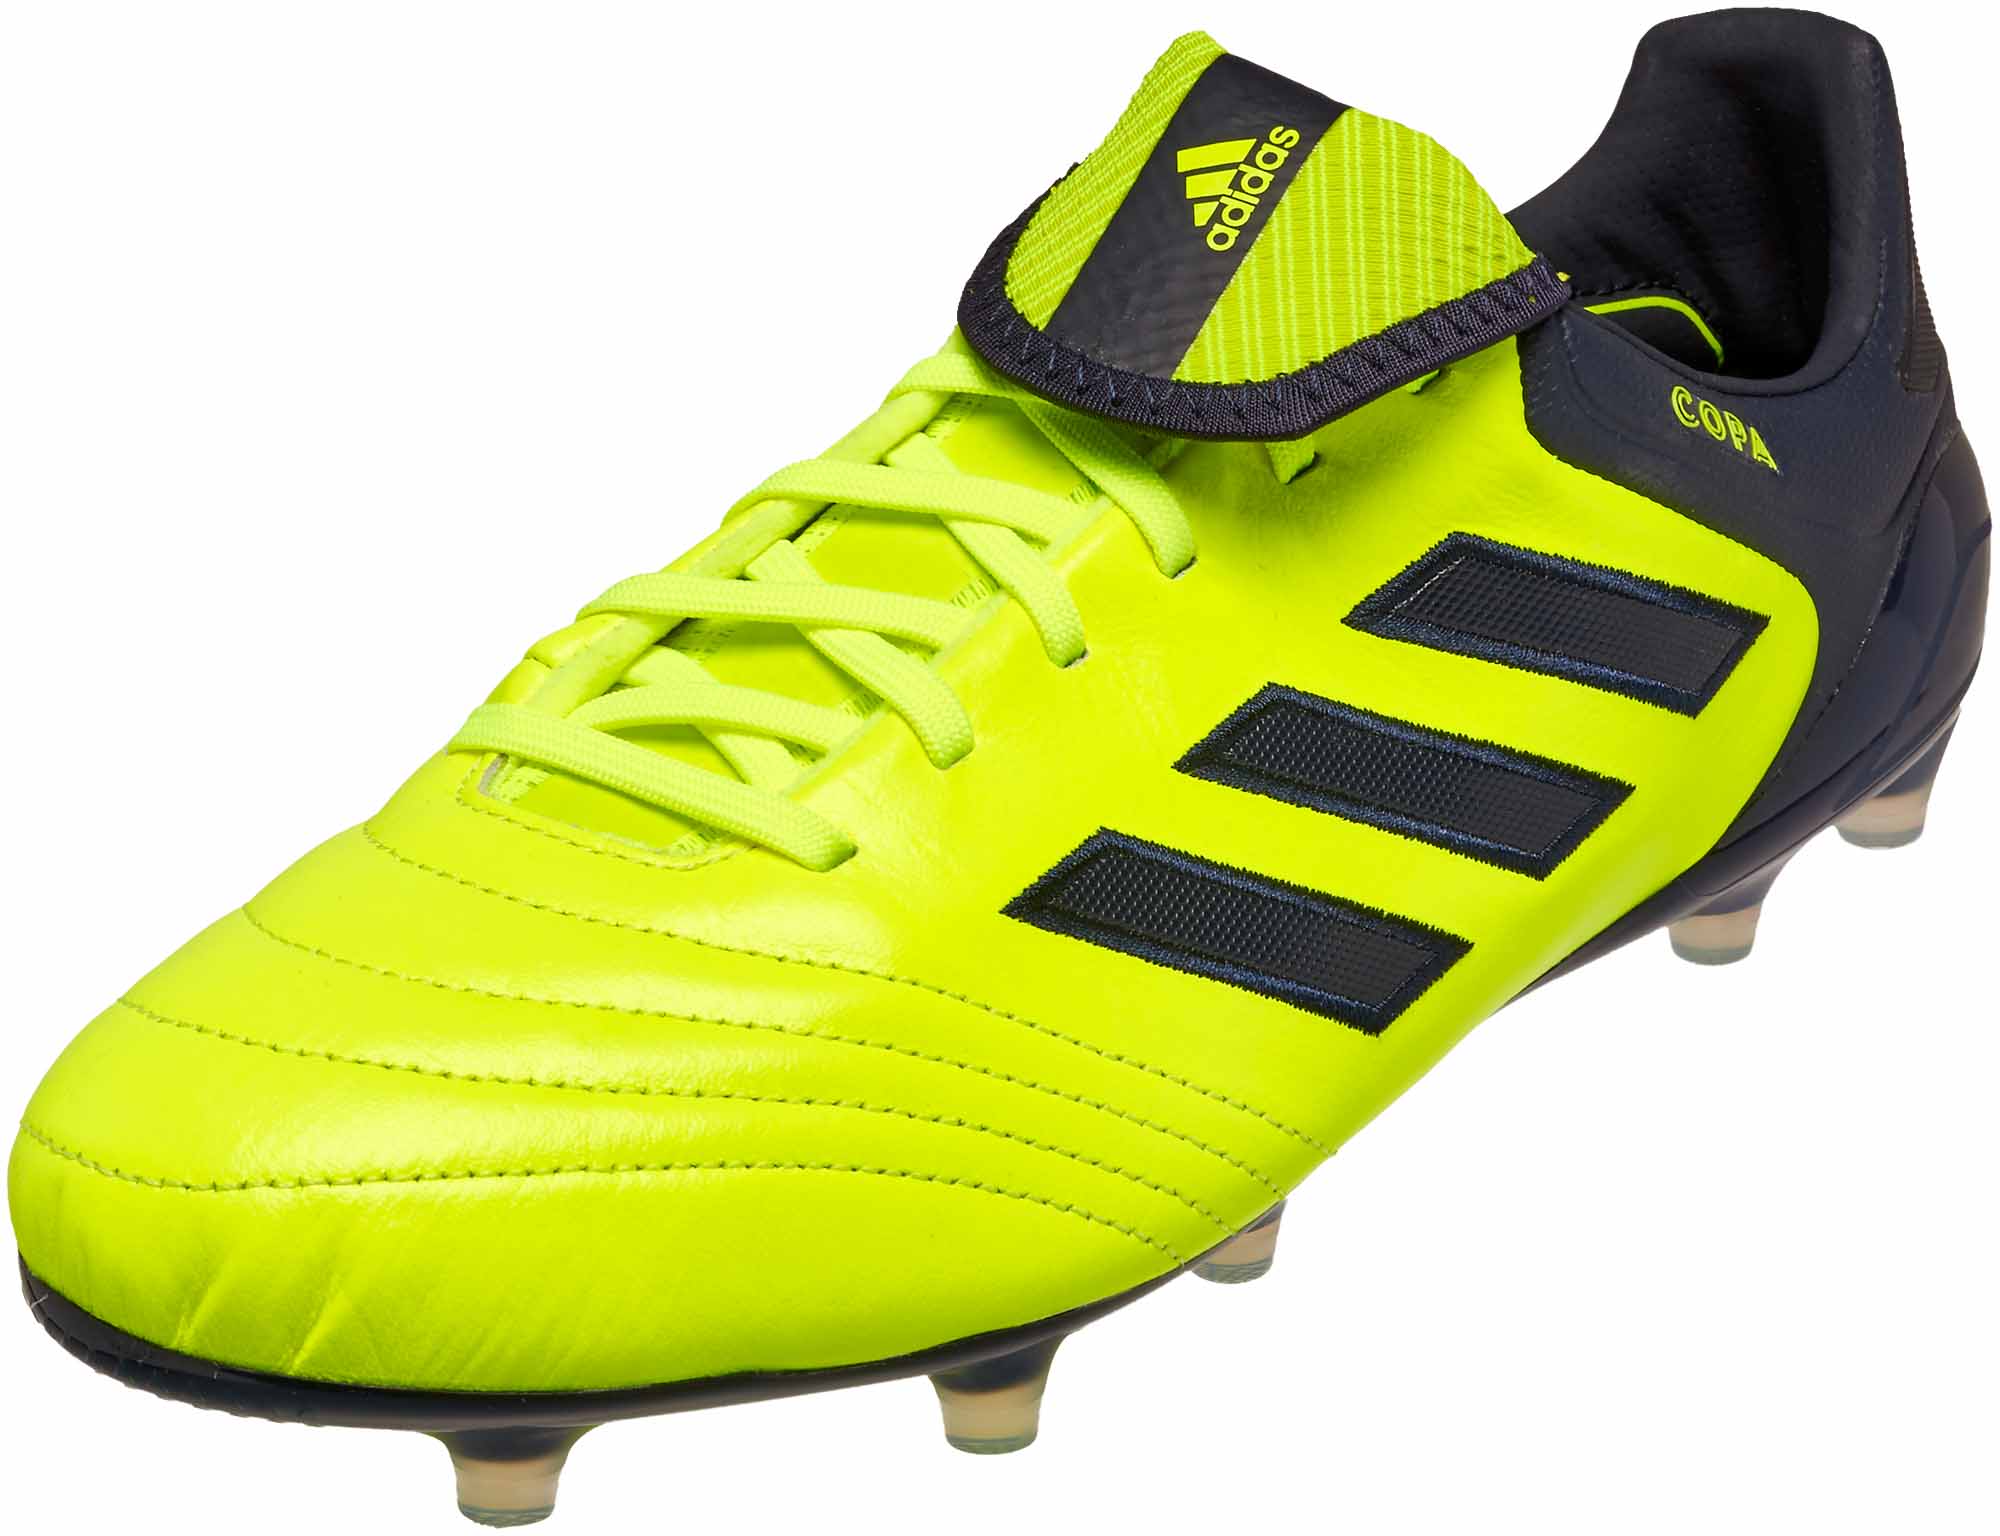 soccer shoes adidas copa